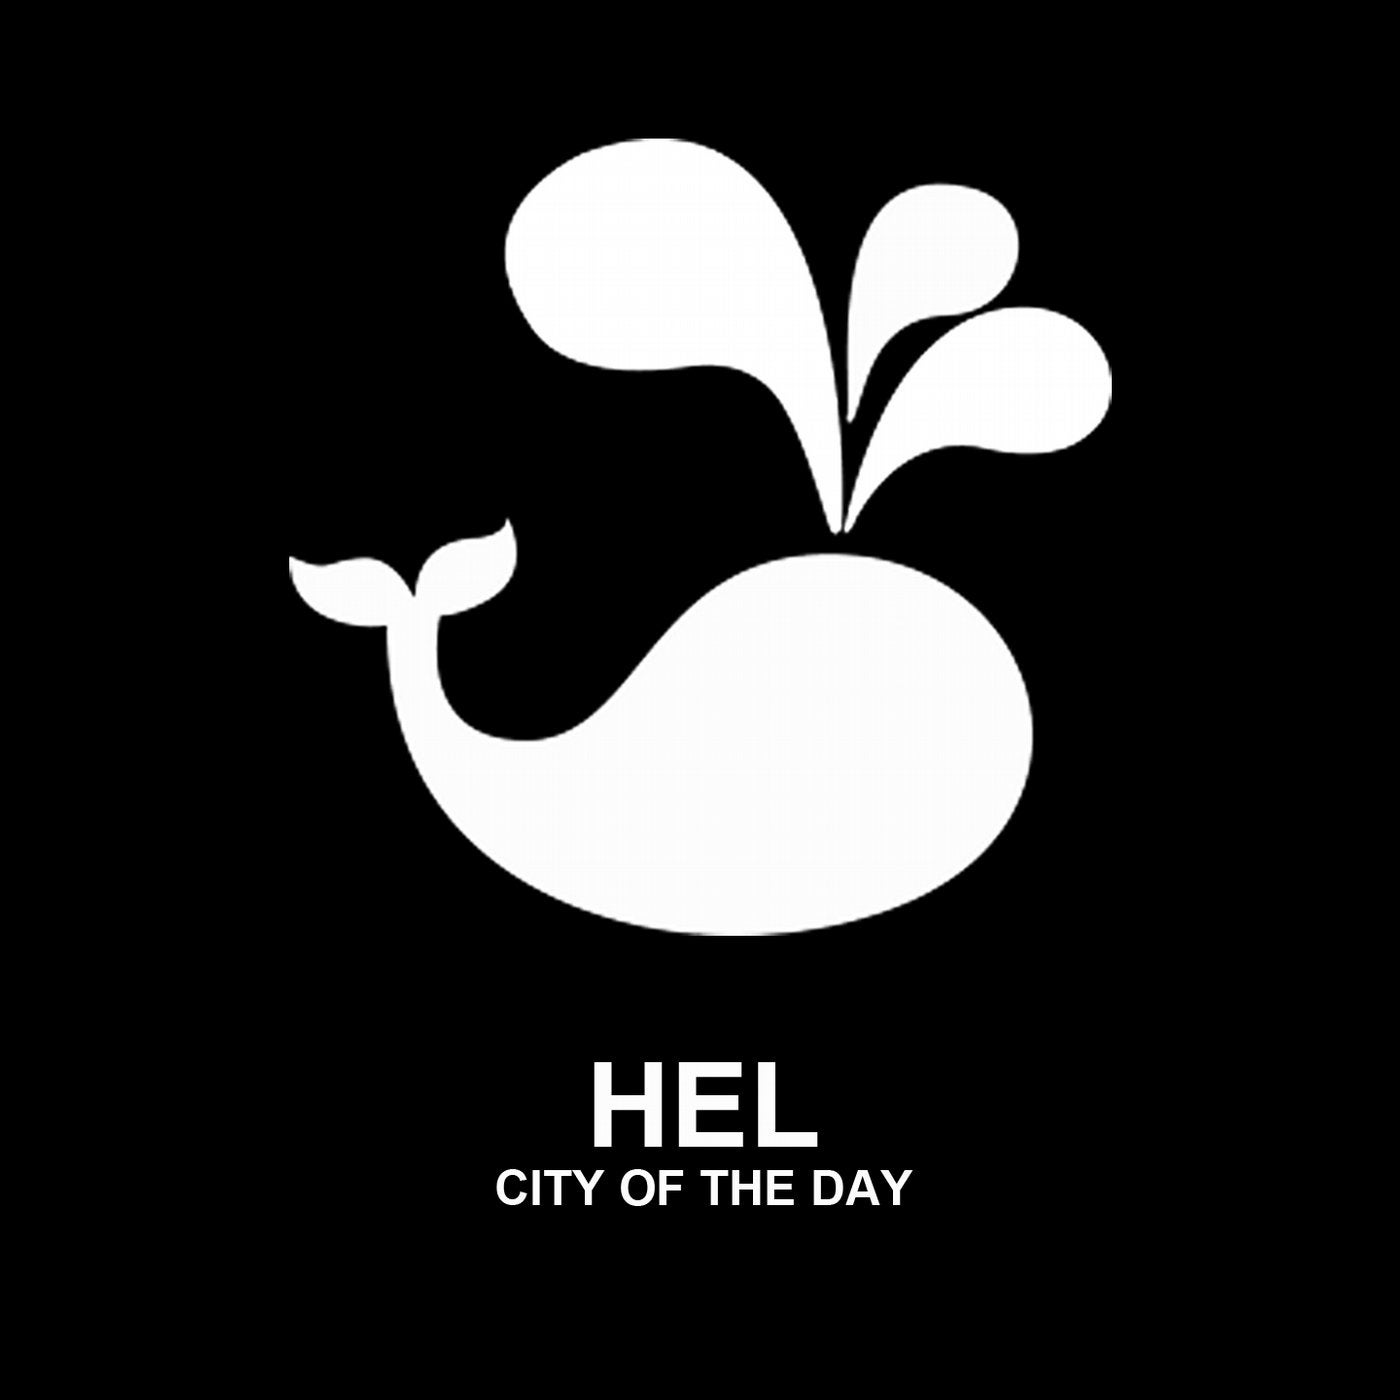 City Of The Day